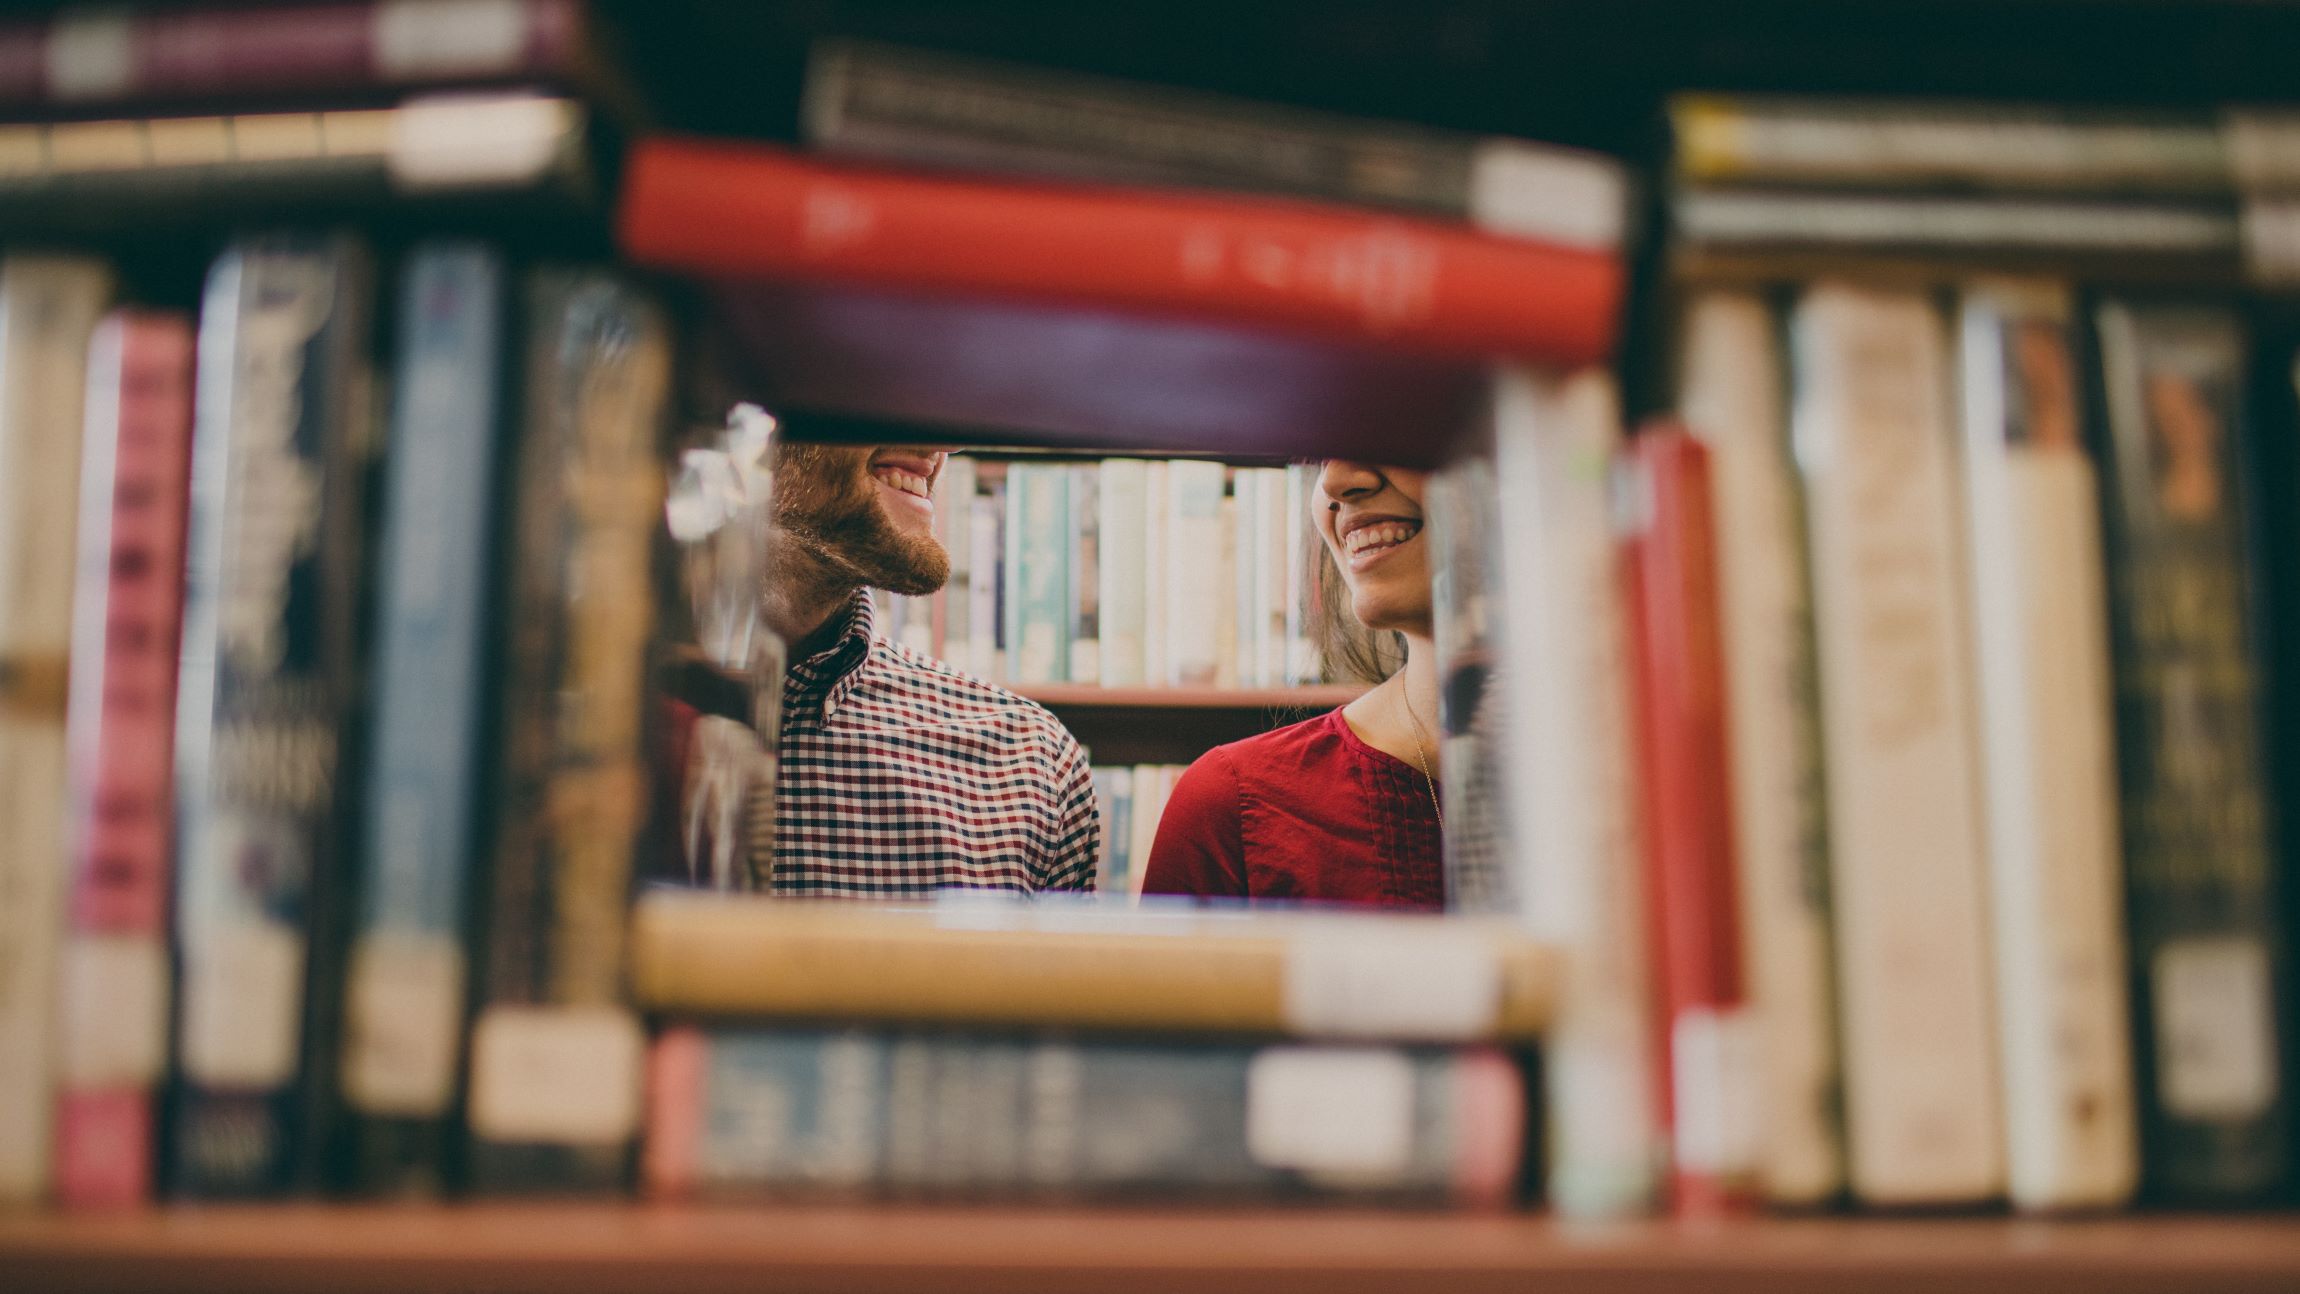 Two people smiling at each other behind books. | Source: Unsplash